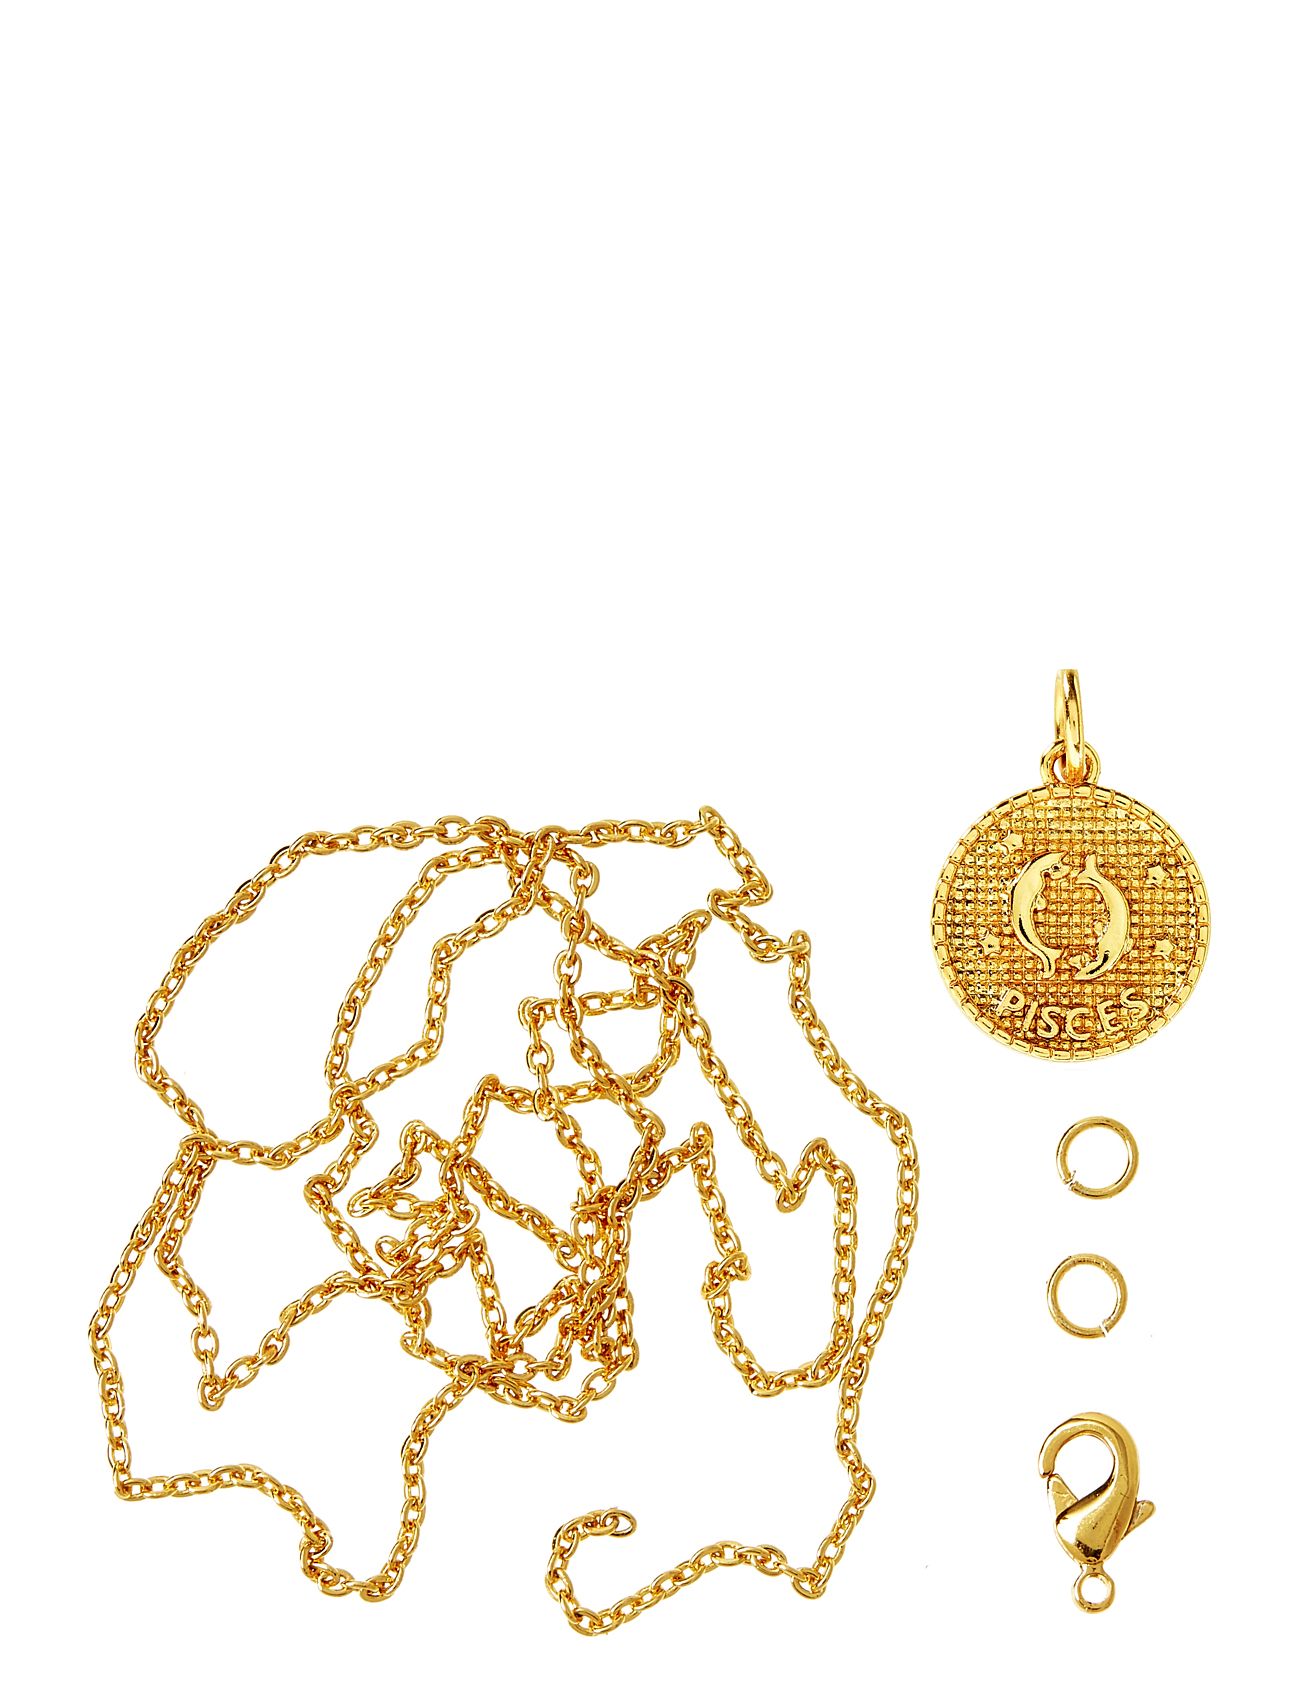 Zodiac Coin Pendant And Chain Set, Pisces Toys Creativity Drawing & Crafts Craft Jewellery & Accessories Gold Me & My Box